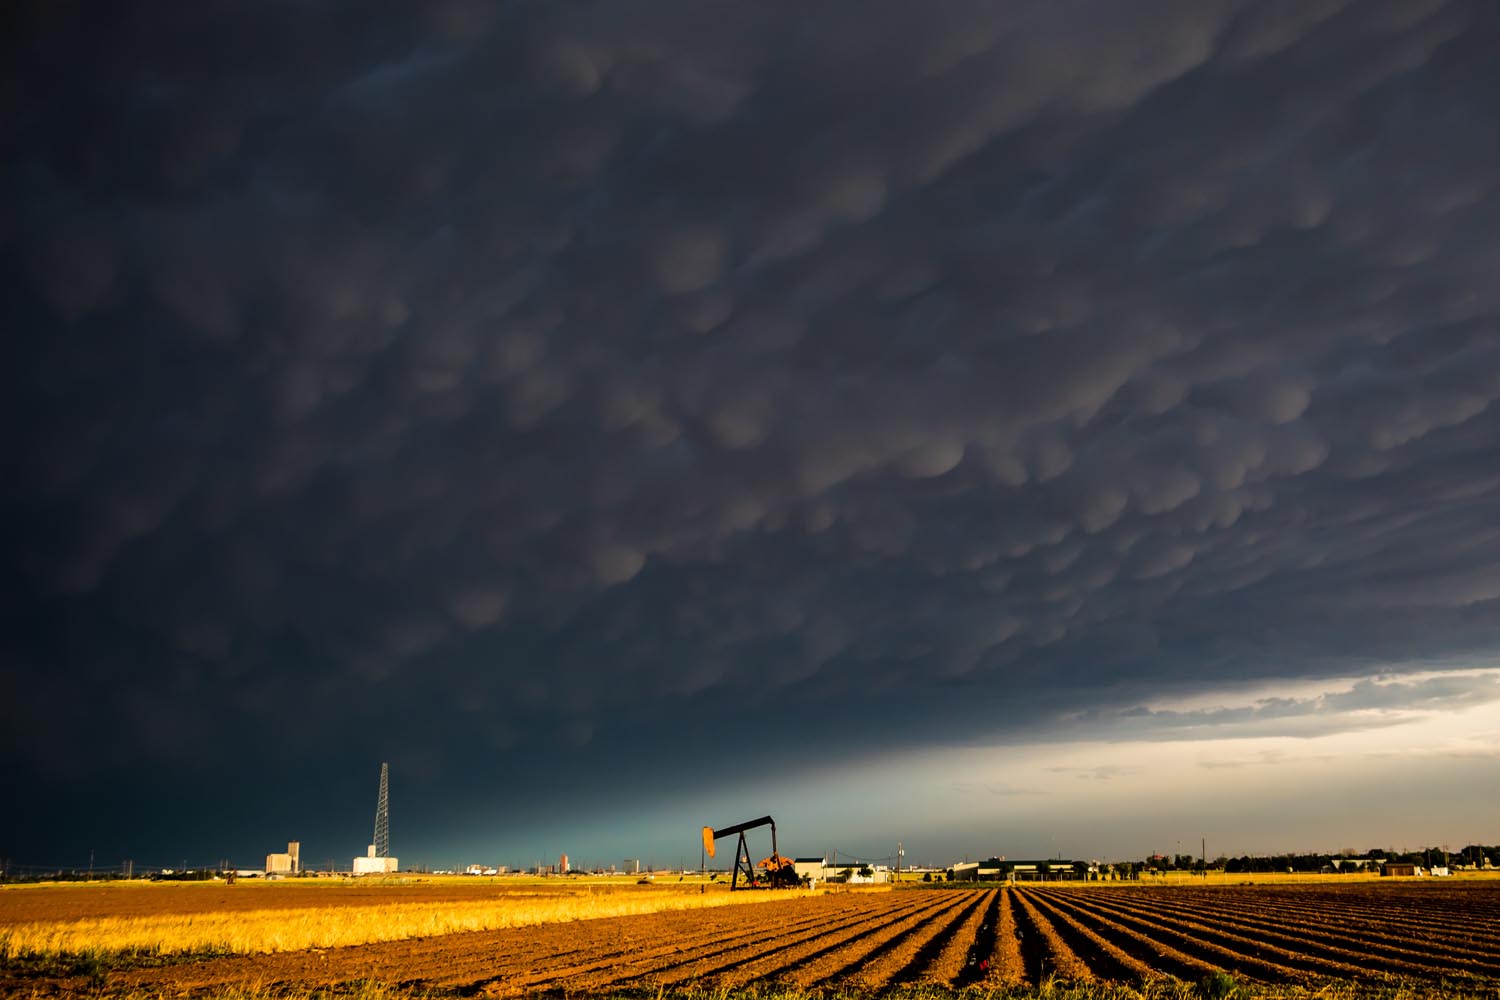 Heather Eaton: After the Storm - West Texas (Lubbock)